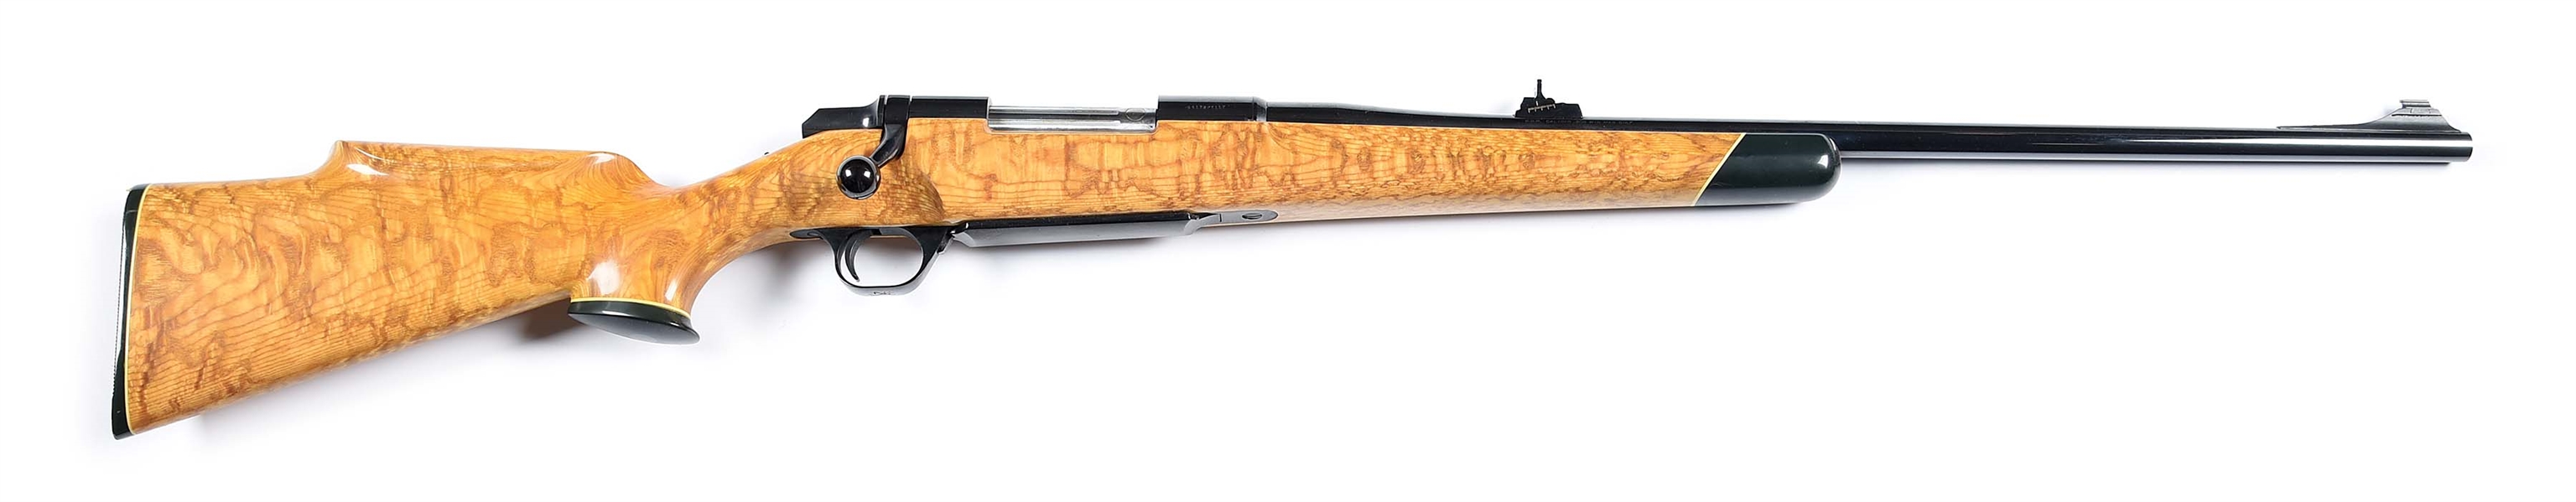 (M) BROWNING BBR BOLT ACTION RIFLE WITH TAMO STOCK.